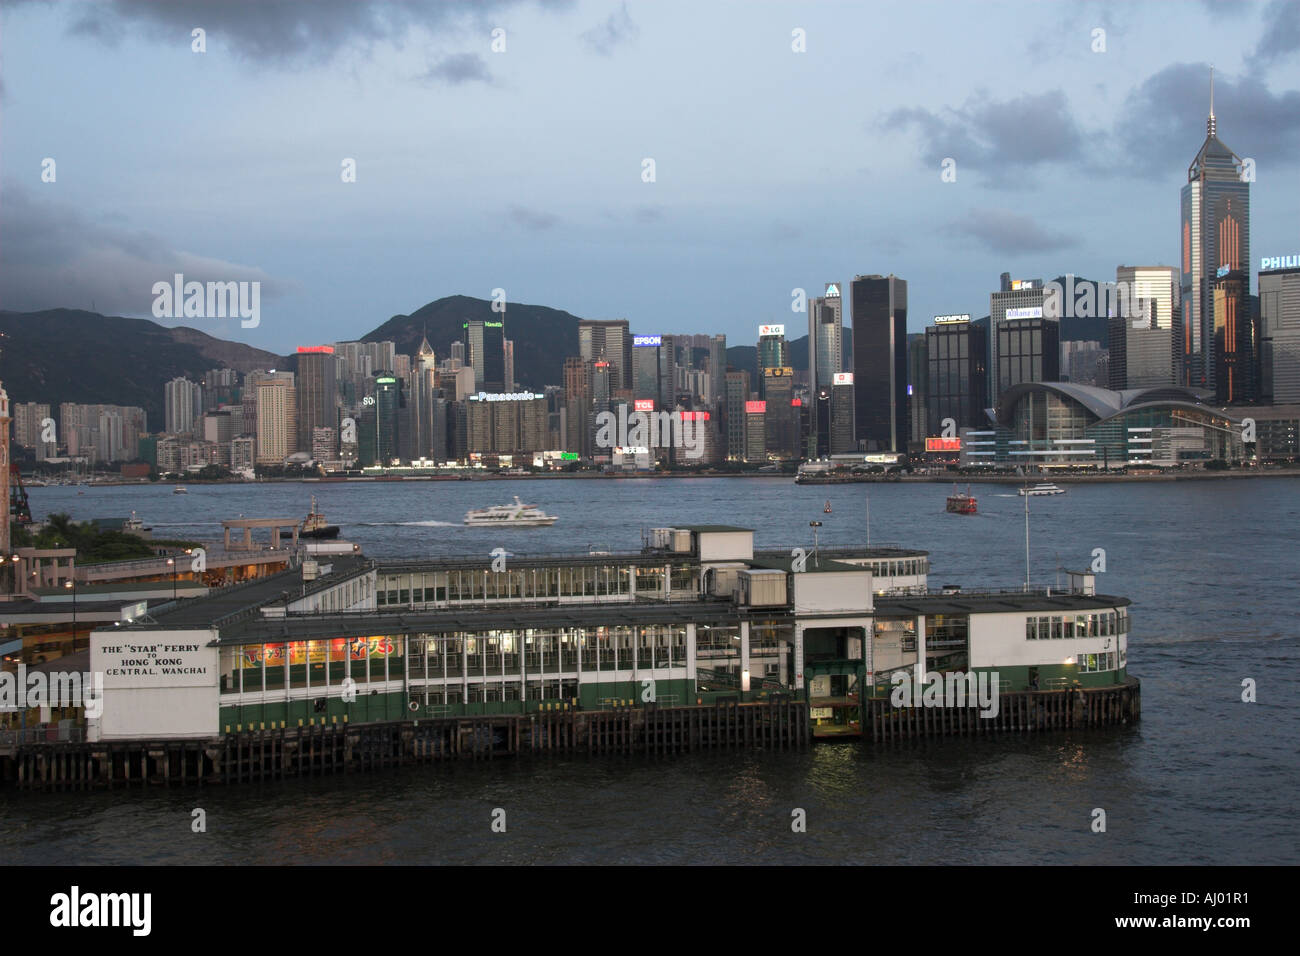 The Star Ferry Pier, Kowloon side, Hong Kong, China. Stock Photo